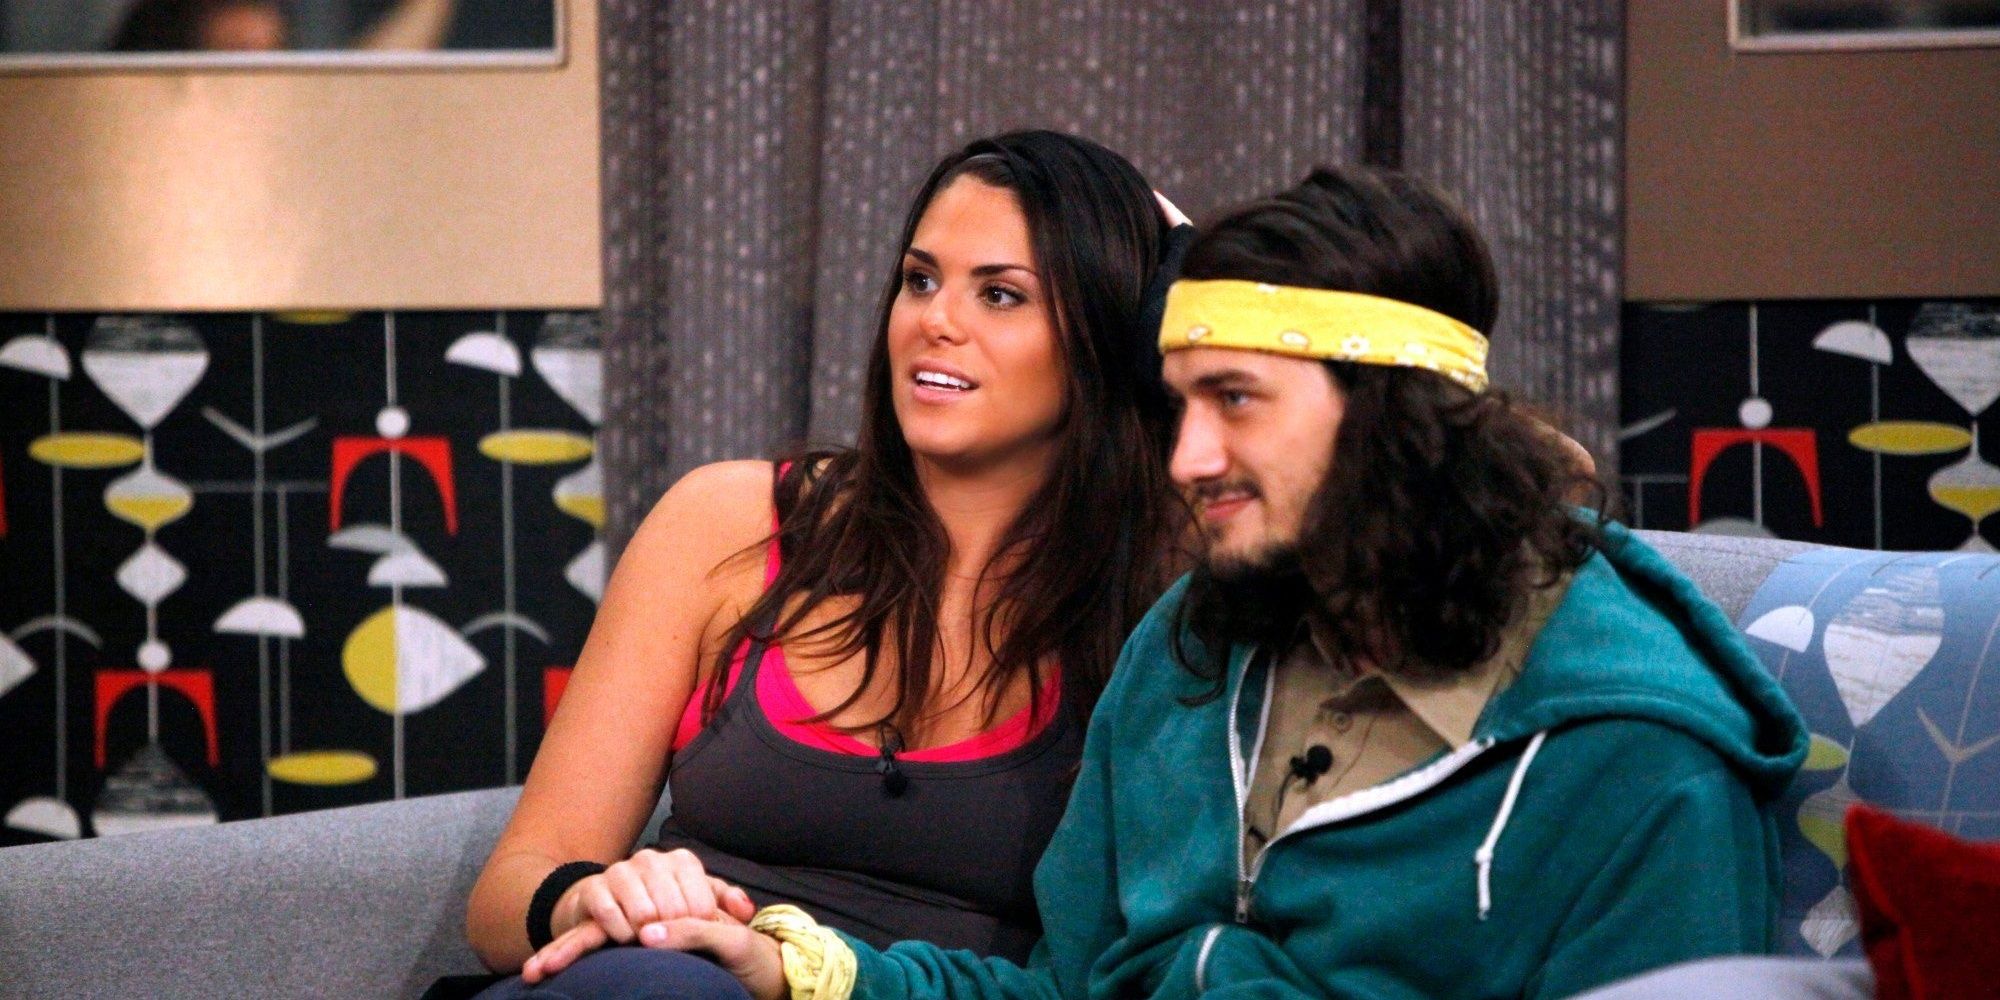 McCrae and Amanda sitting on the couch holding hands and smiling off camera.